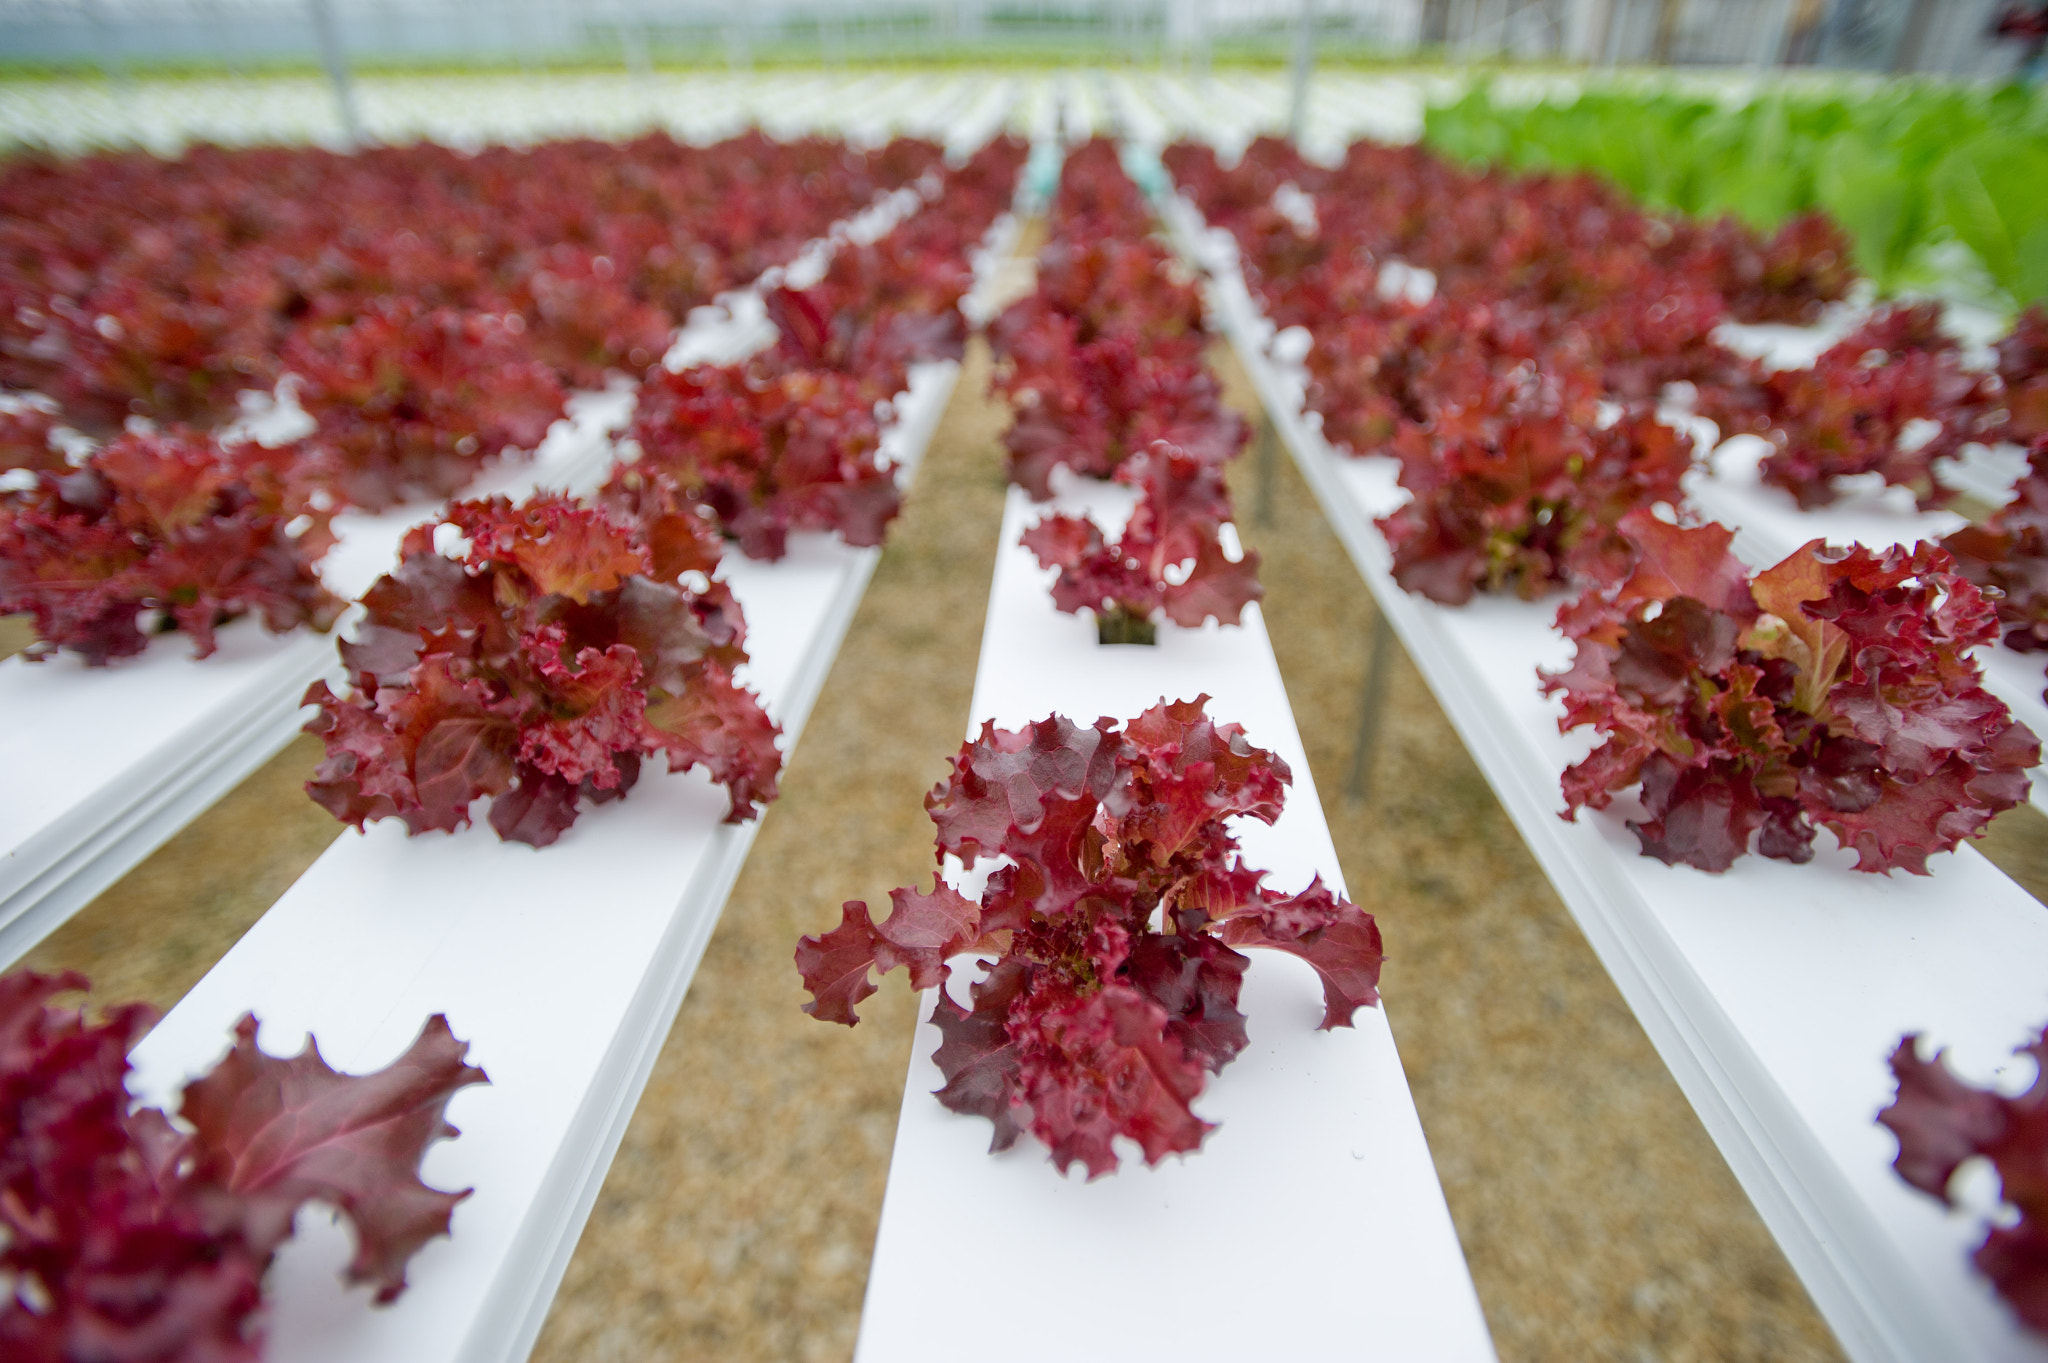 Nikon D3S + Nikon AF-S Nikkor 17-35mm F2.8D ED-IF sample photo. Hydroponic lettuce rows in greenhouse photography